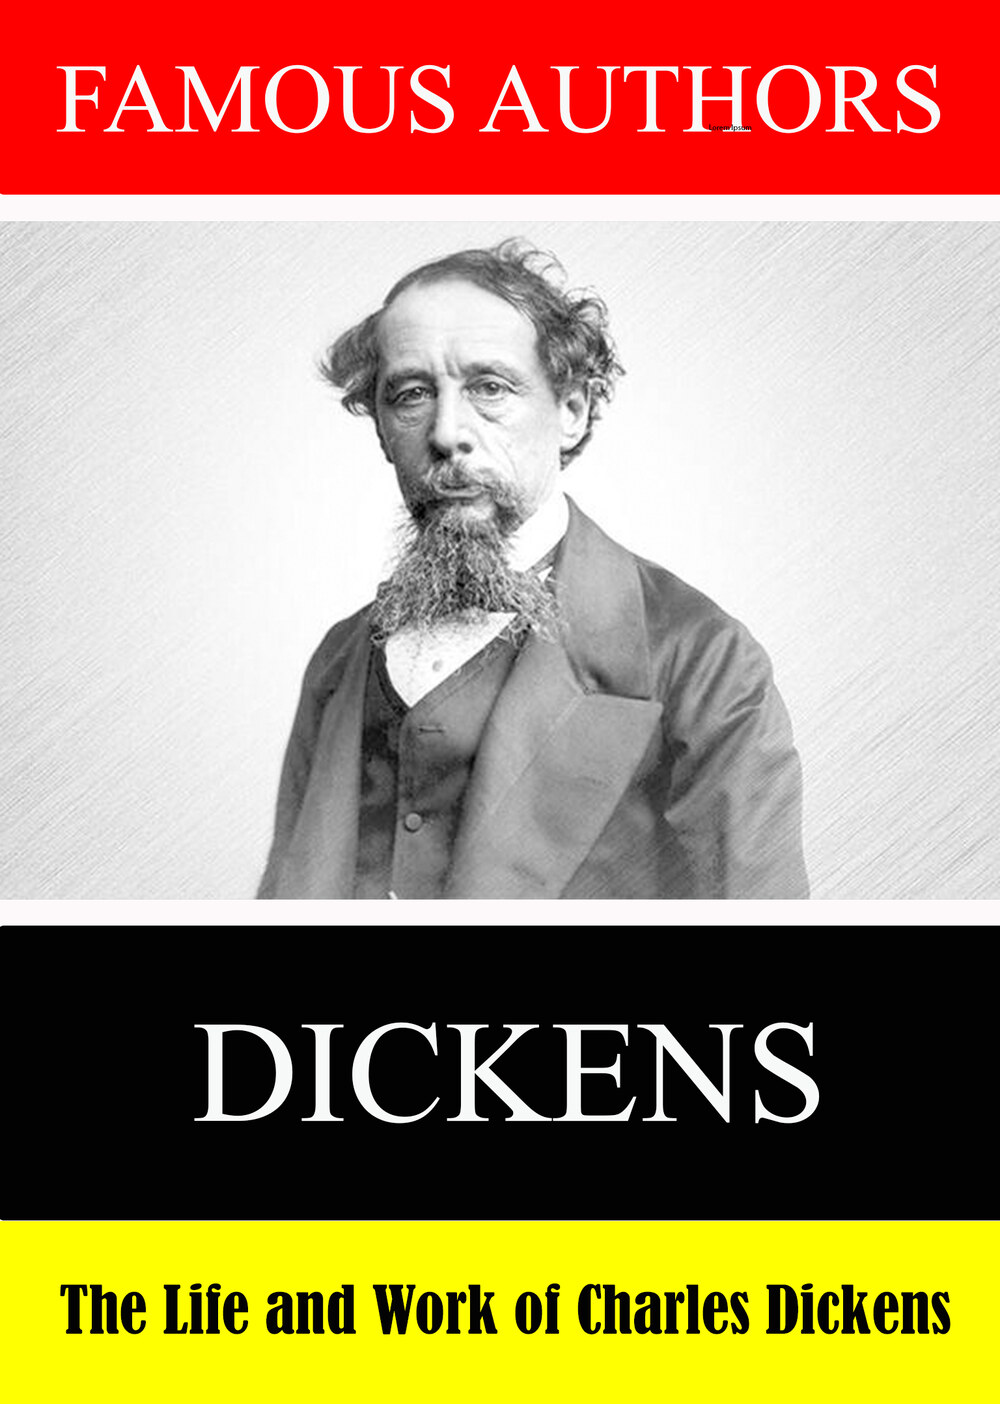 L7877 - Famous Authors: The Life and Work of Charles Dickens